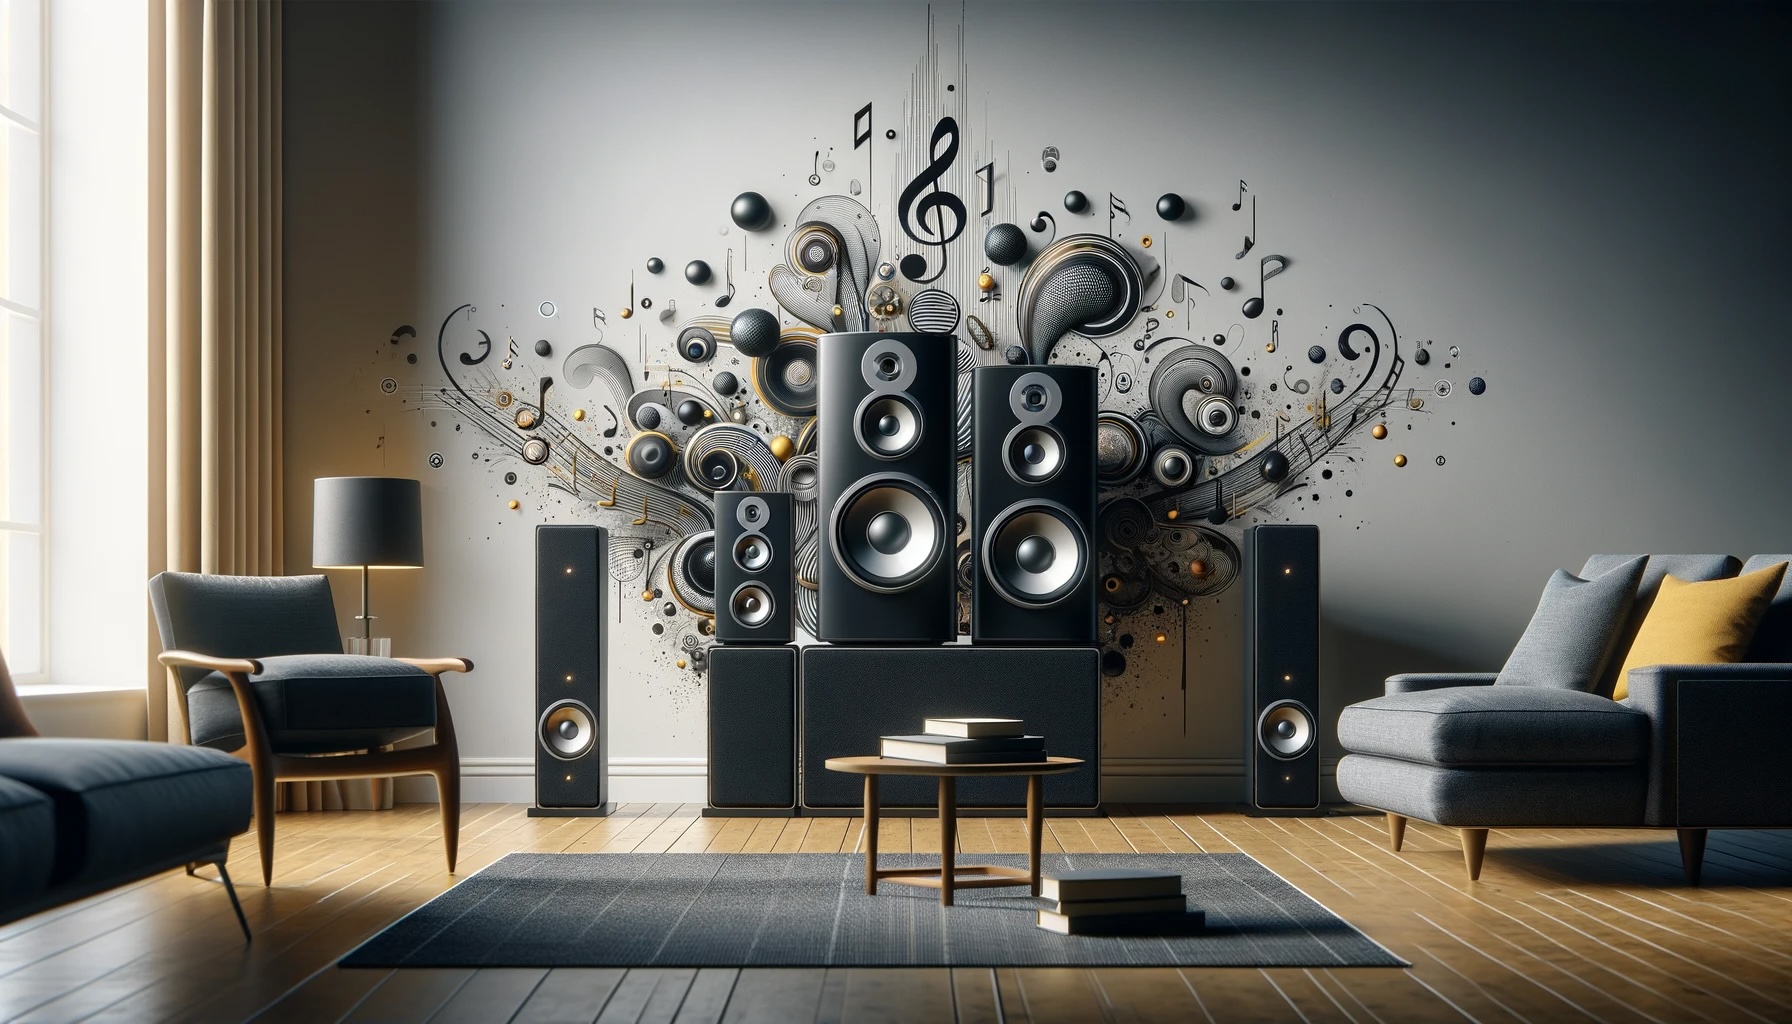 An artistic display of speakers and audio elements